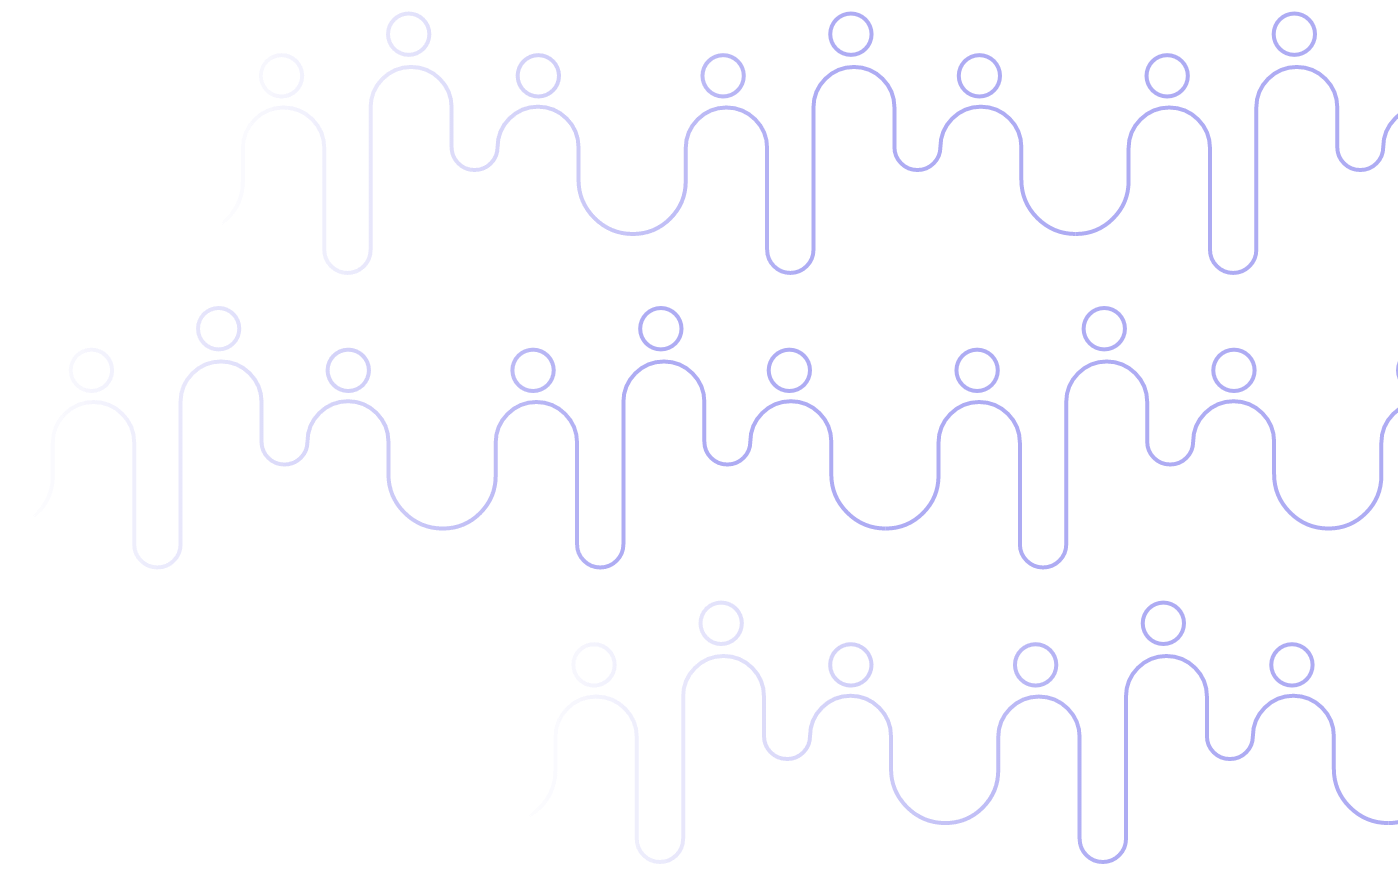 A simple blue line-drawing pattern of human silhouettes arranged in three rows.